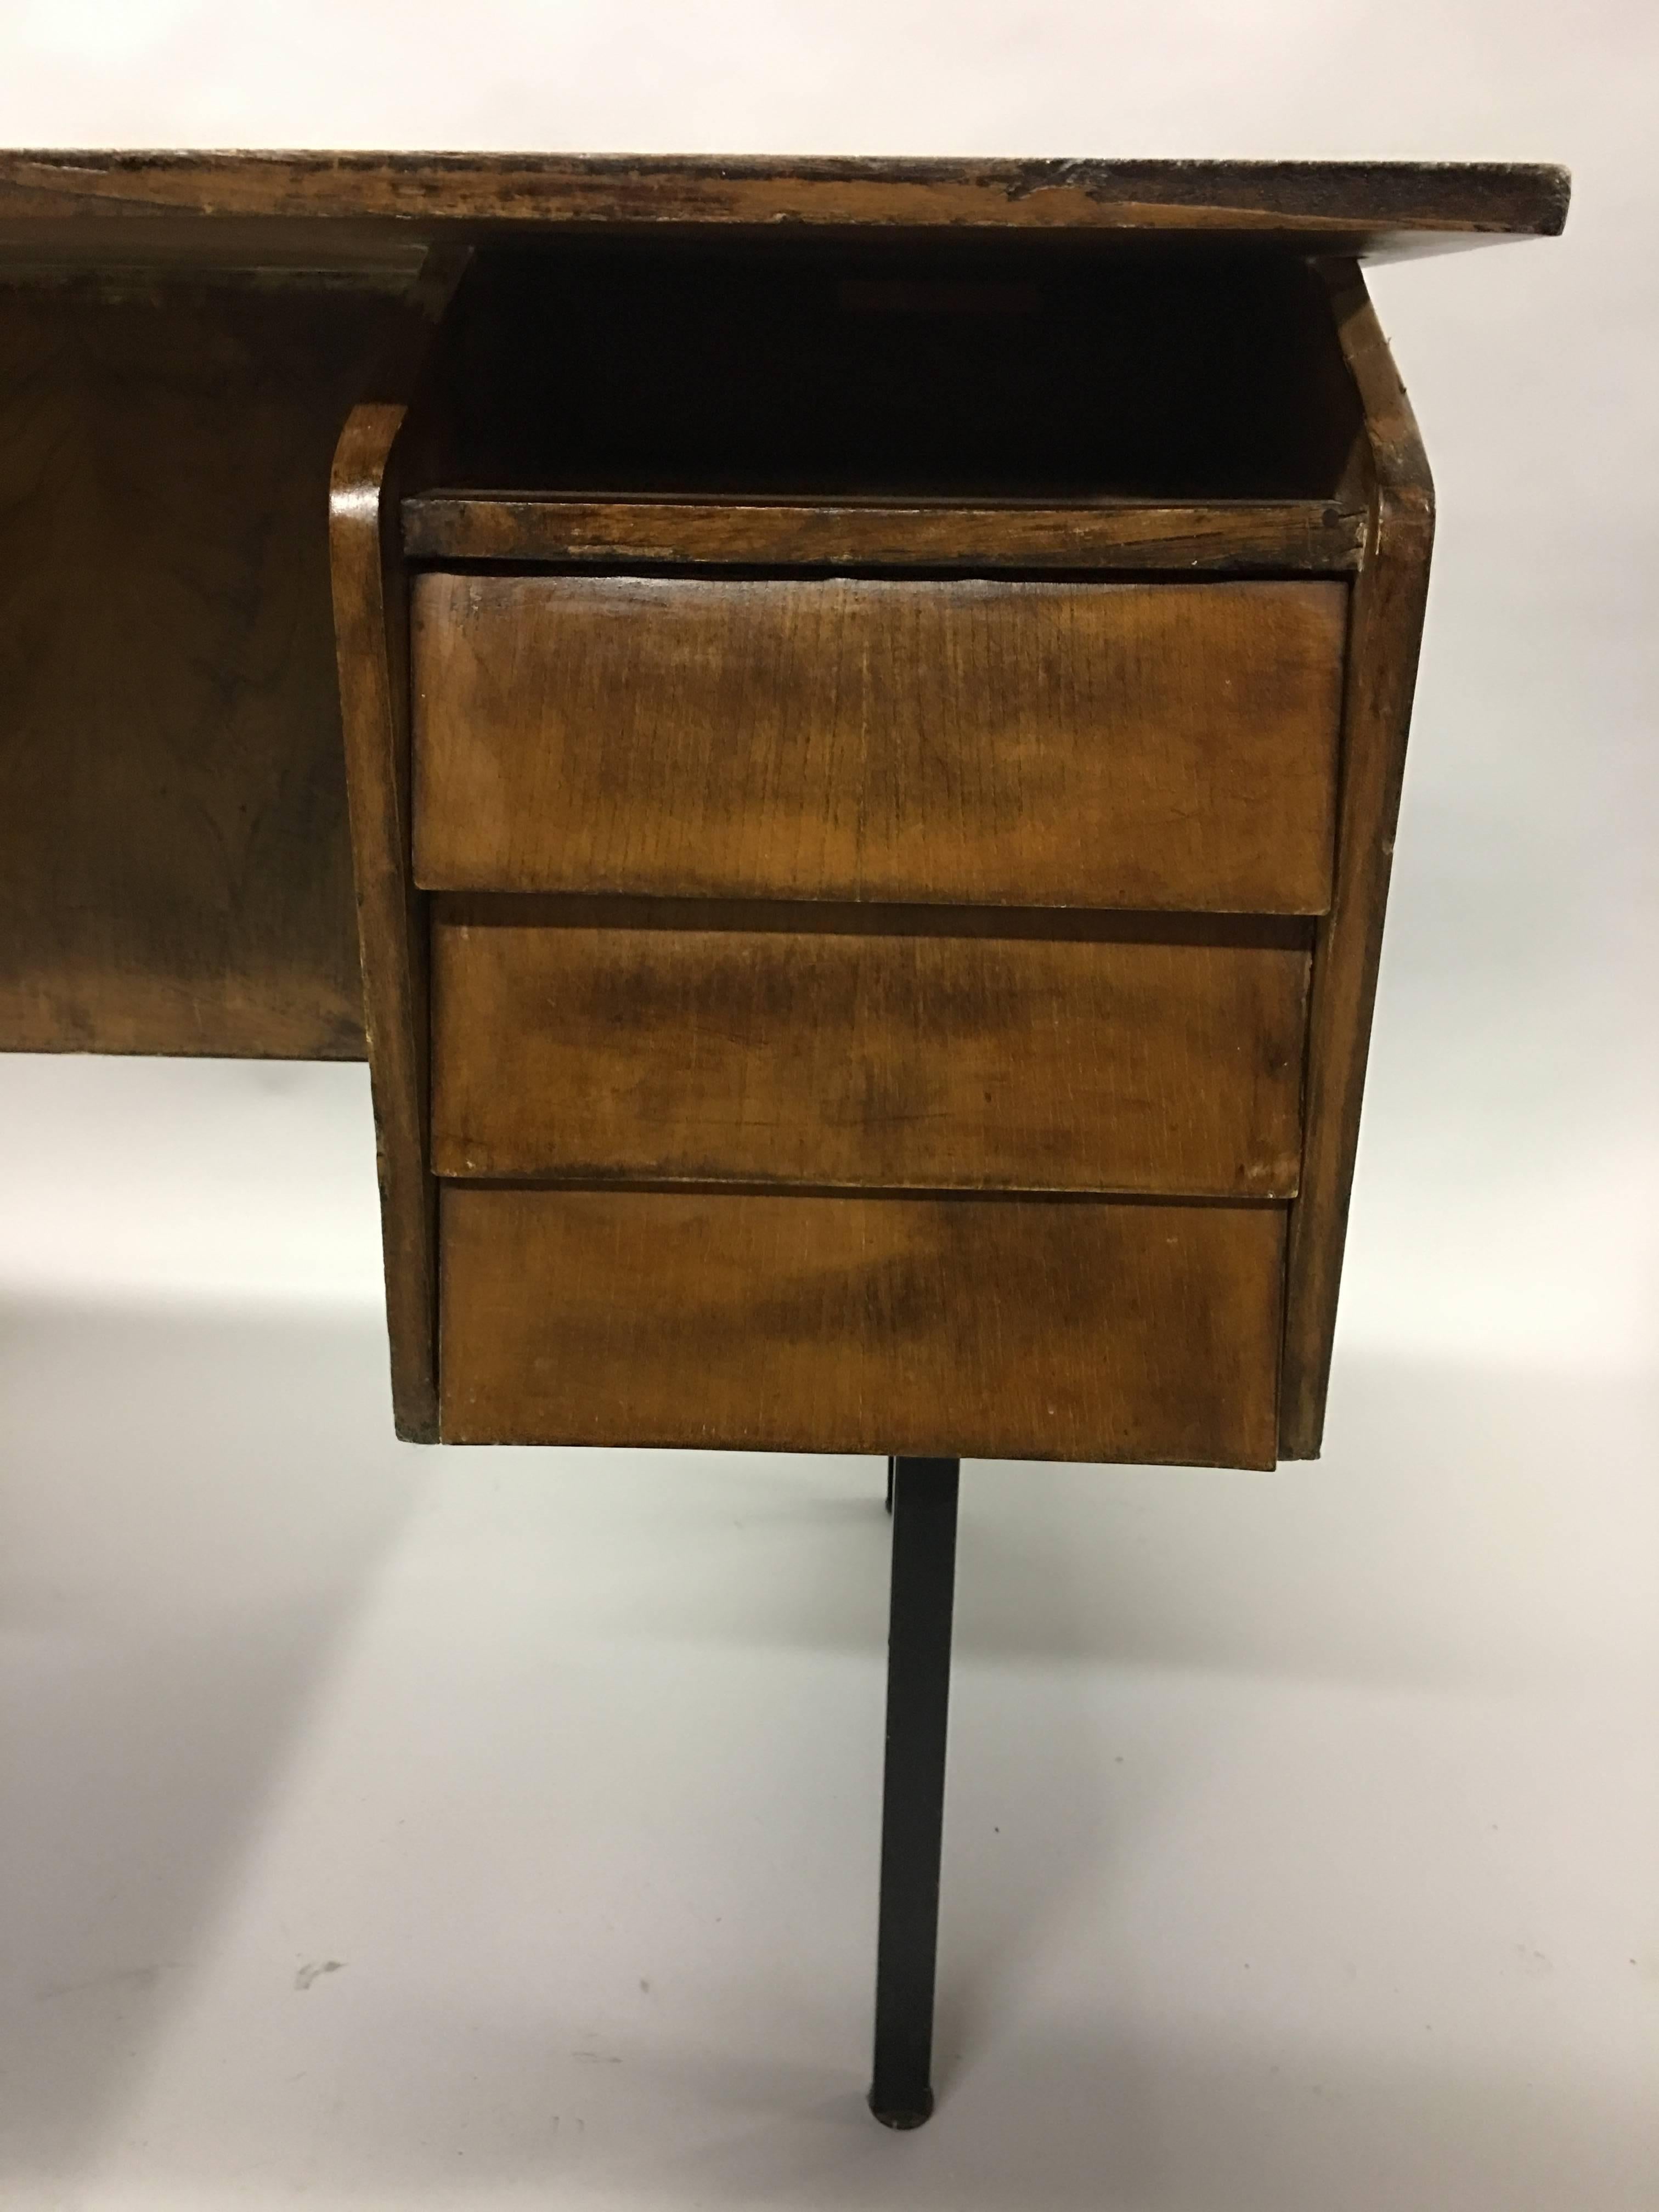 German Mid-Century Modern Cantilevered Wood and Metal Desk by Voss, 1950 In Fair Condition For Sale In New York, NY